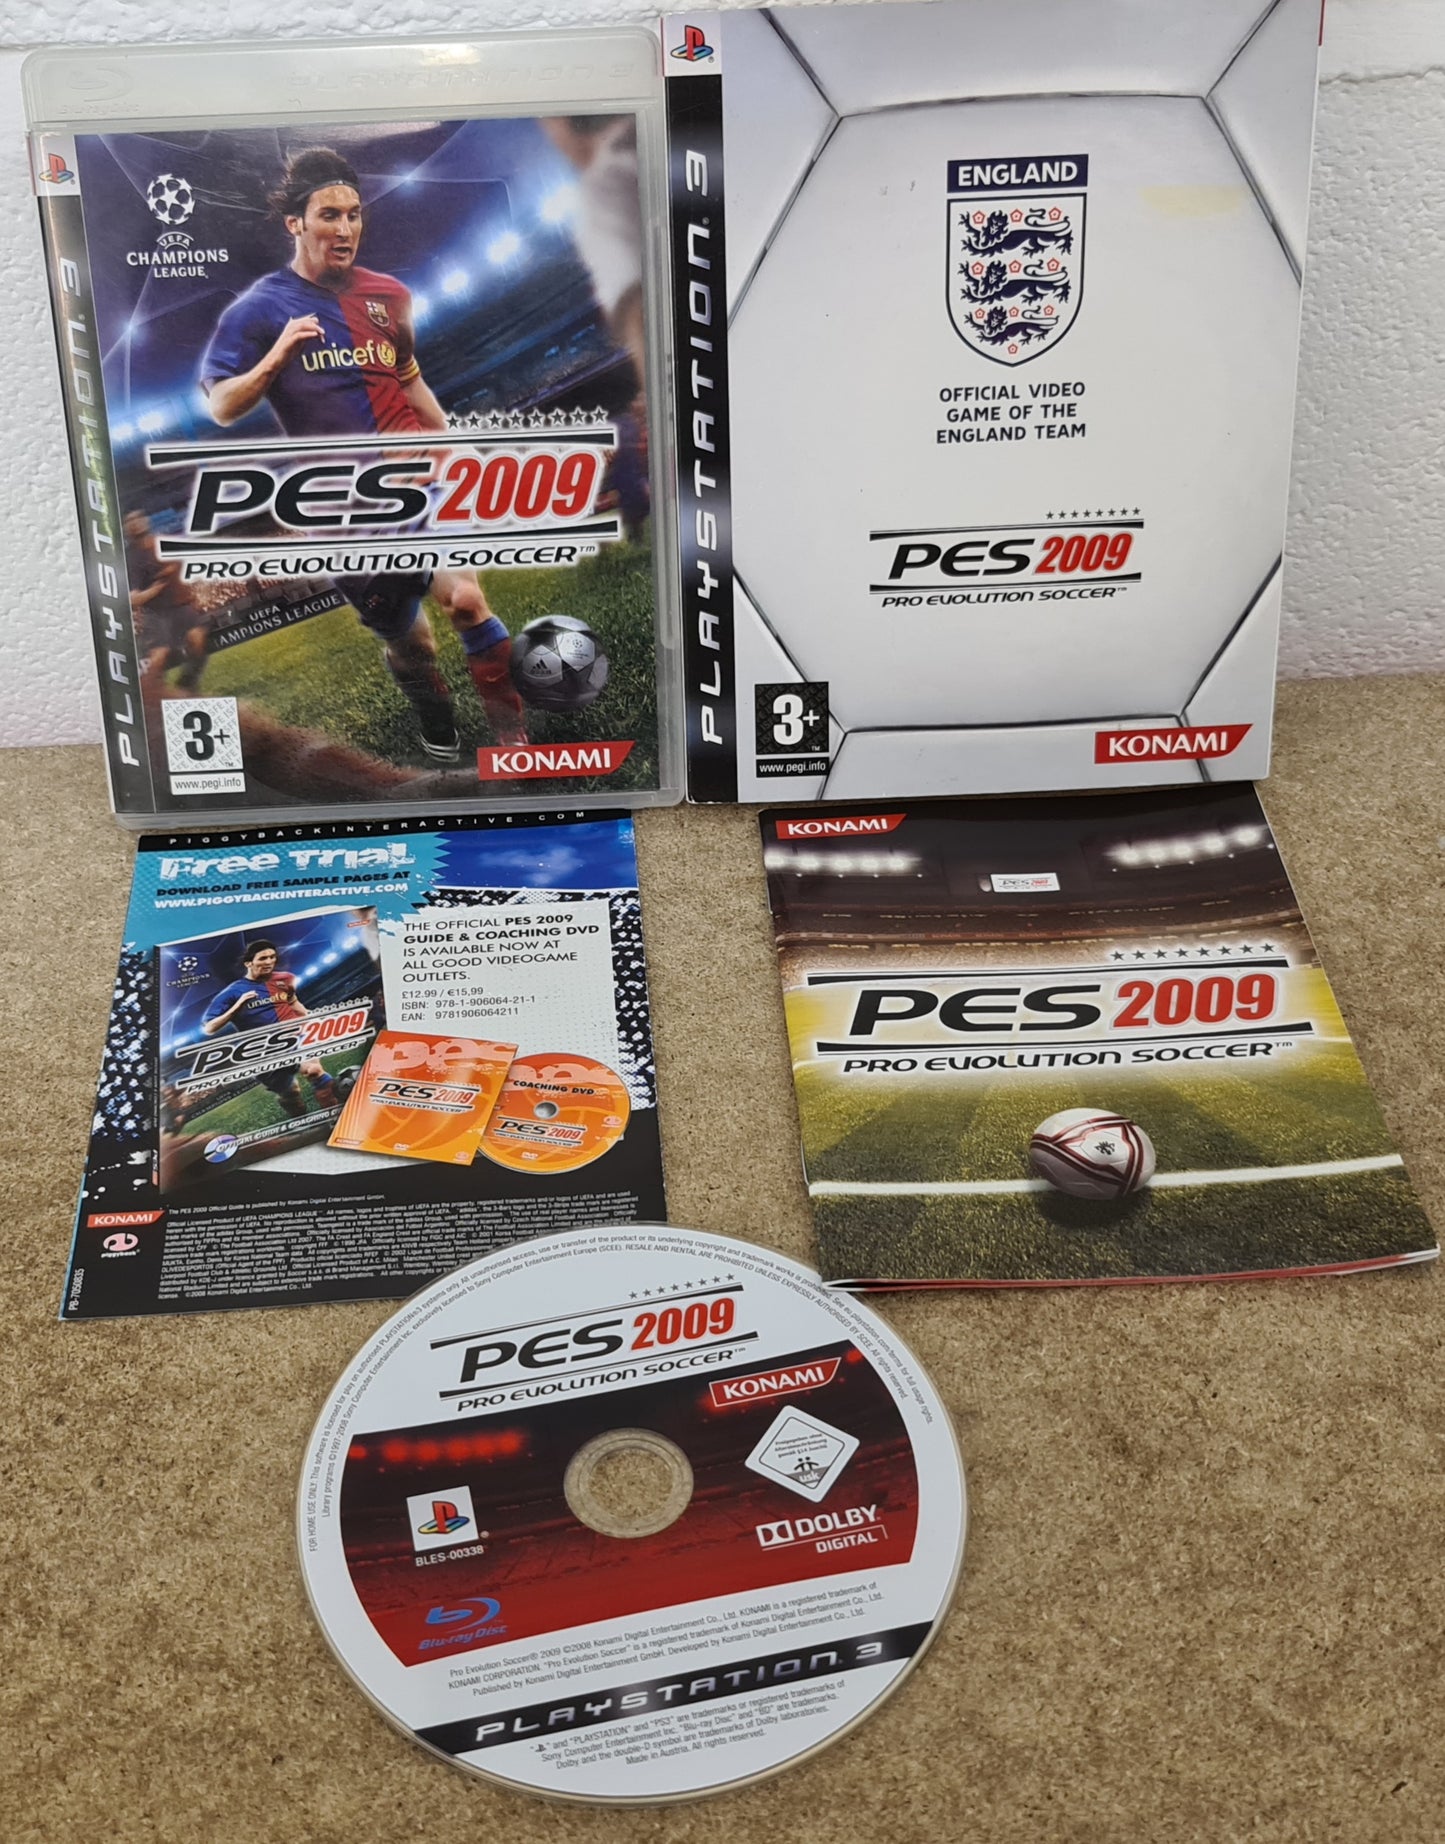 PES 2009 Pro Evolution Soccer RARE Official Game of England Edition Sony Playstation 3 (PS3) Game